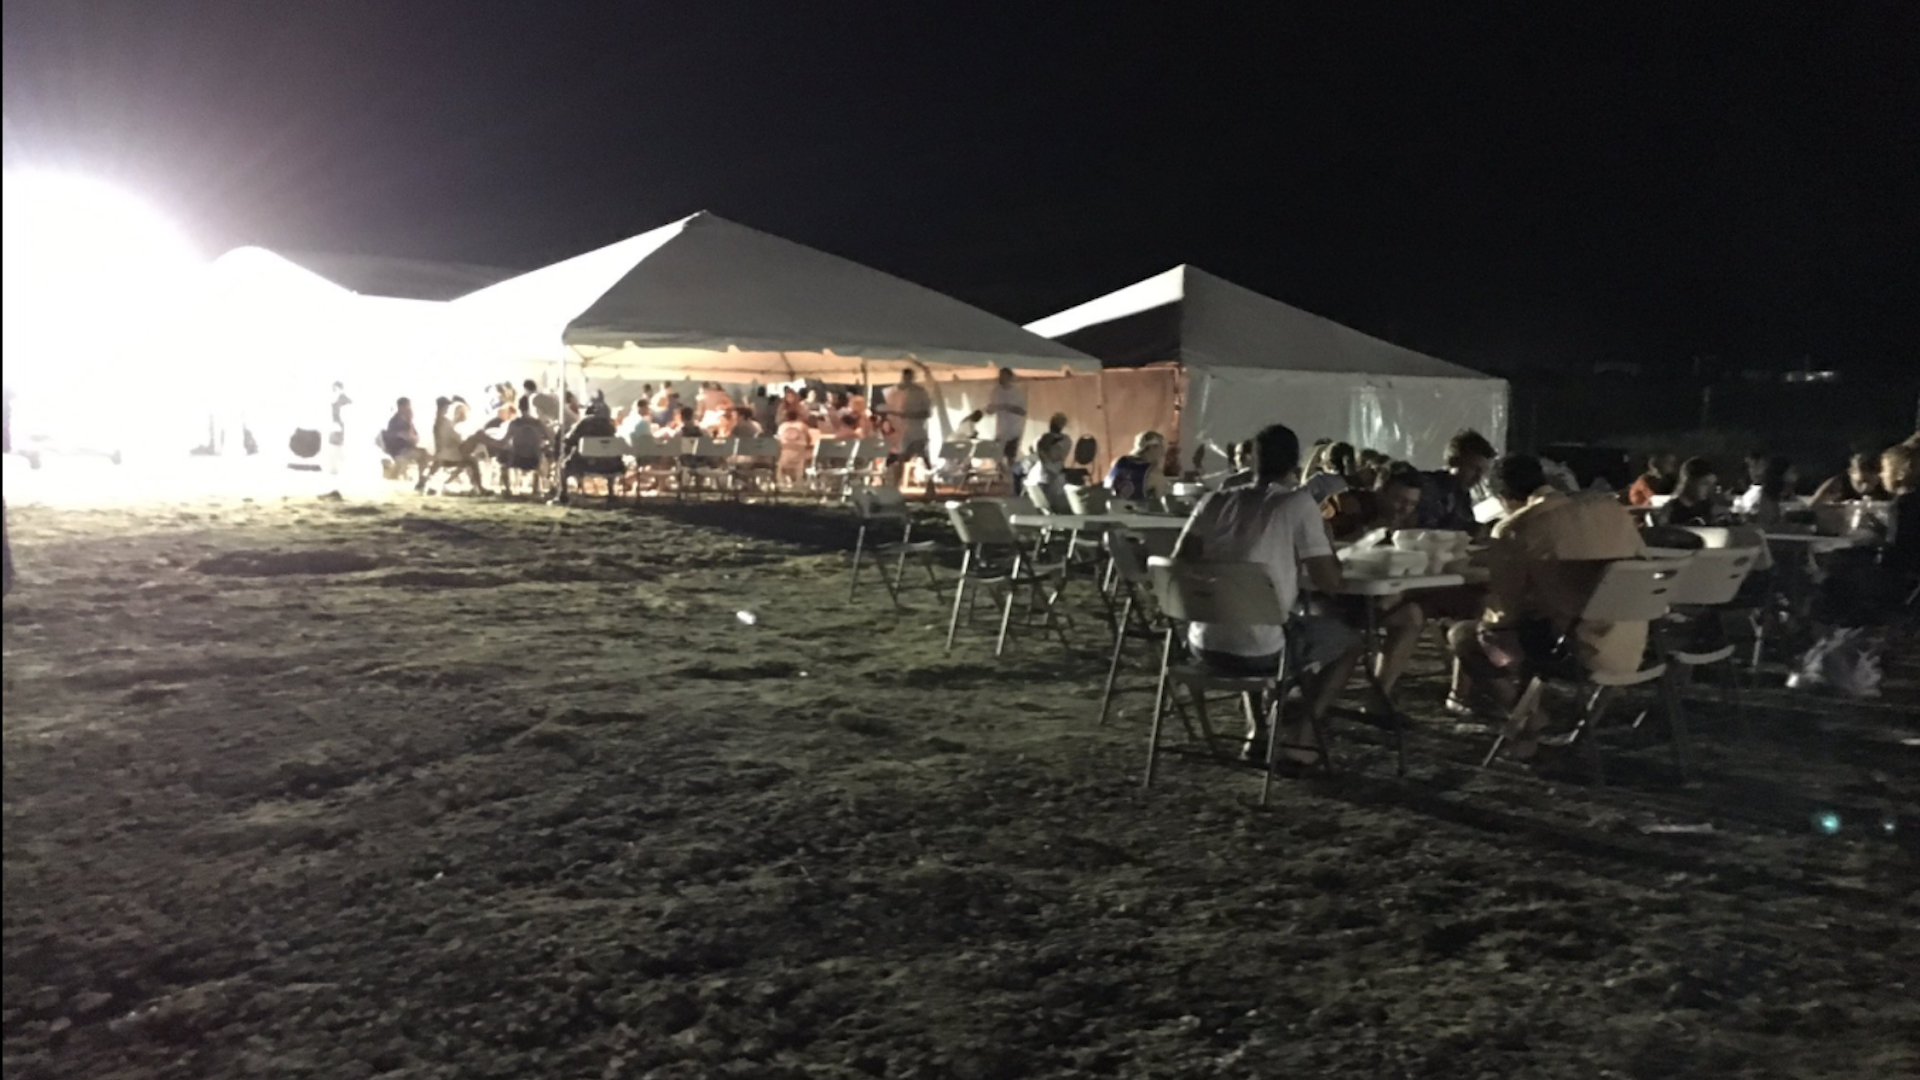 The complete disaster of Fyre Festival played out on social media for all  to see; 'NOT MY FAULT' says organizer Ja Rule - The Washington Post